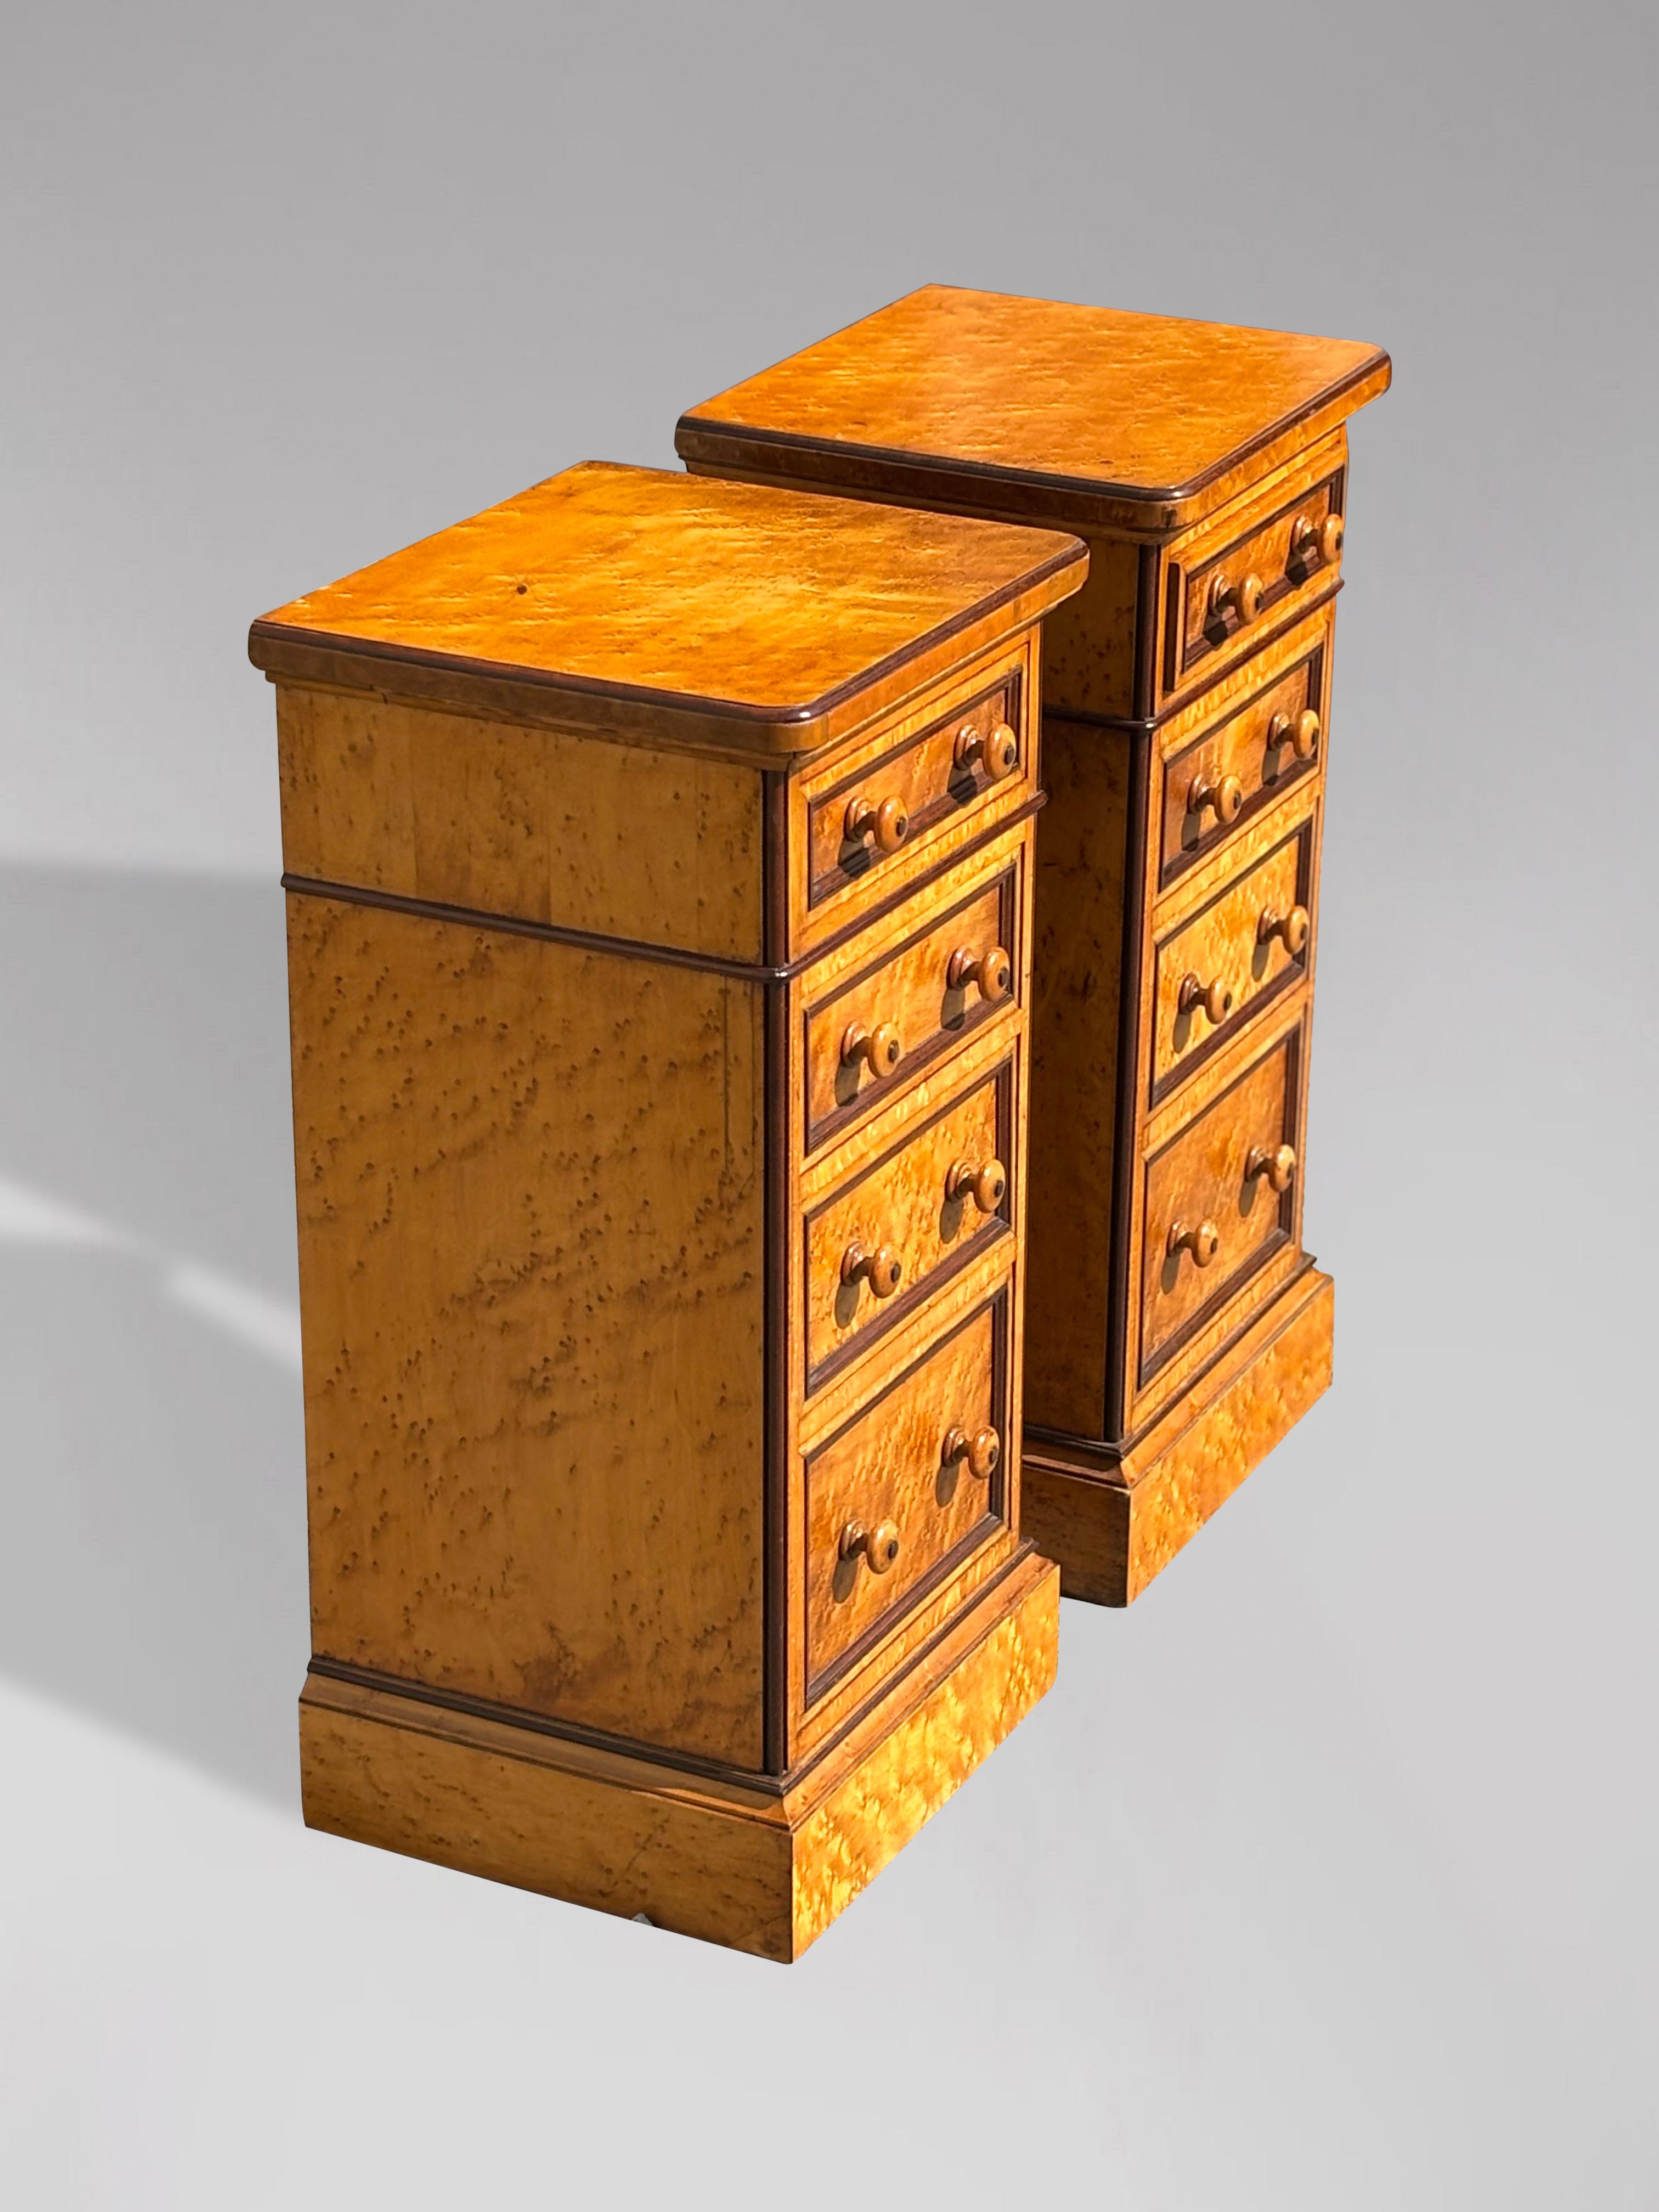 Pair of 19th Century Victorian Period Bedside Chests in Birdseye Maple In Good Condition For Sale In Petworth,West Sussex, GB